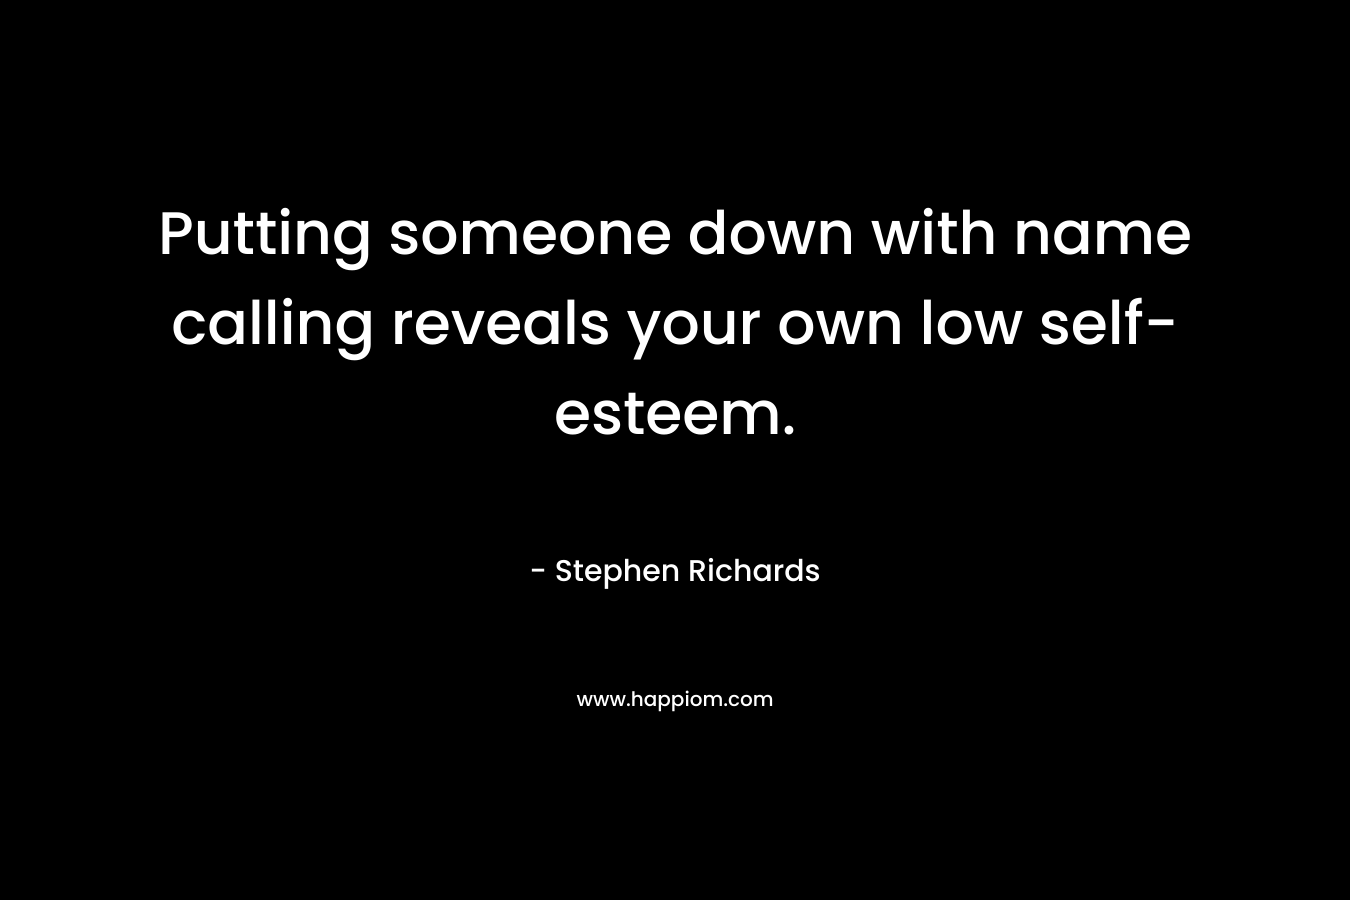 Putting someone down with name calling reveals your own low self-esteem.